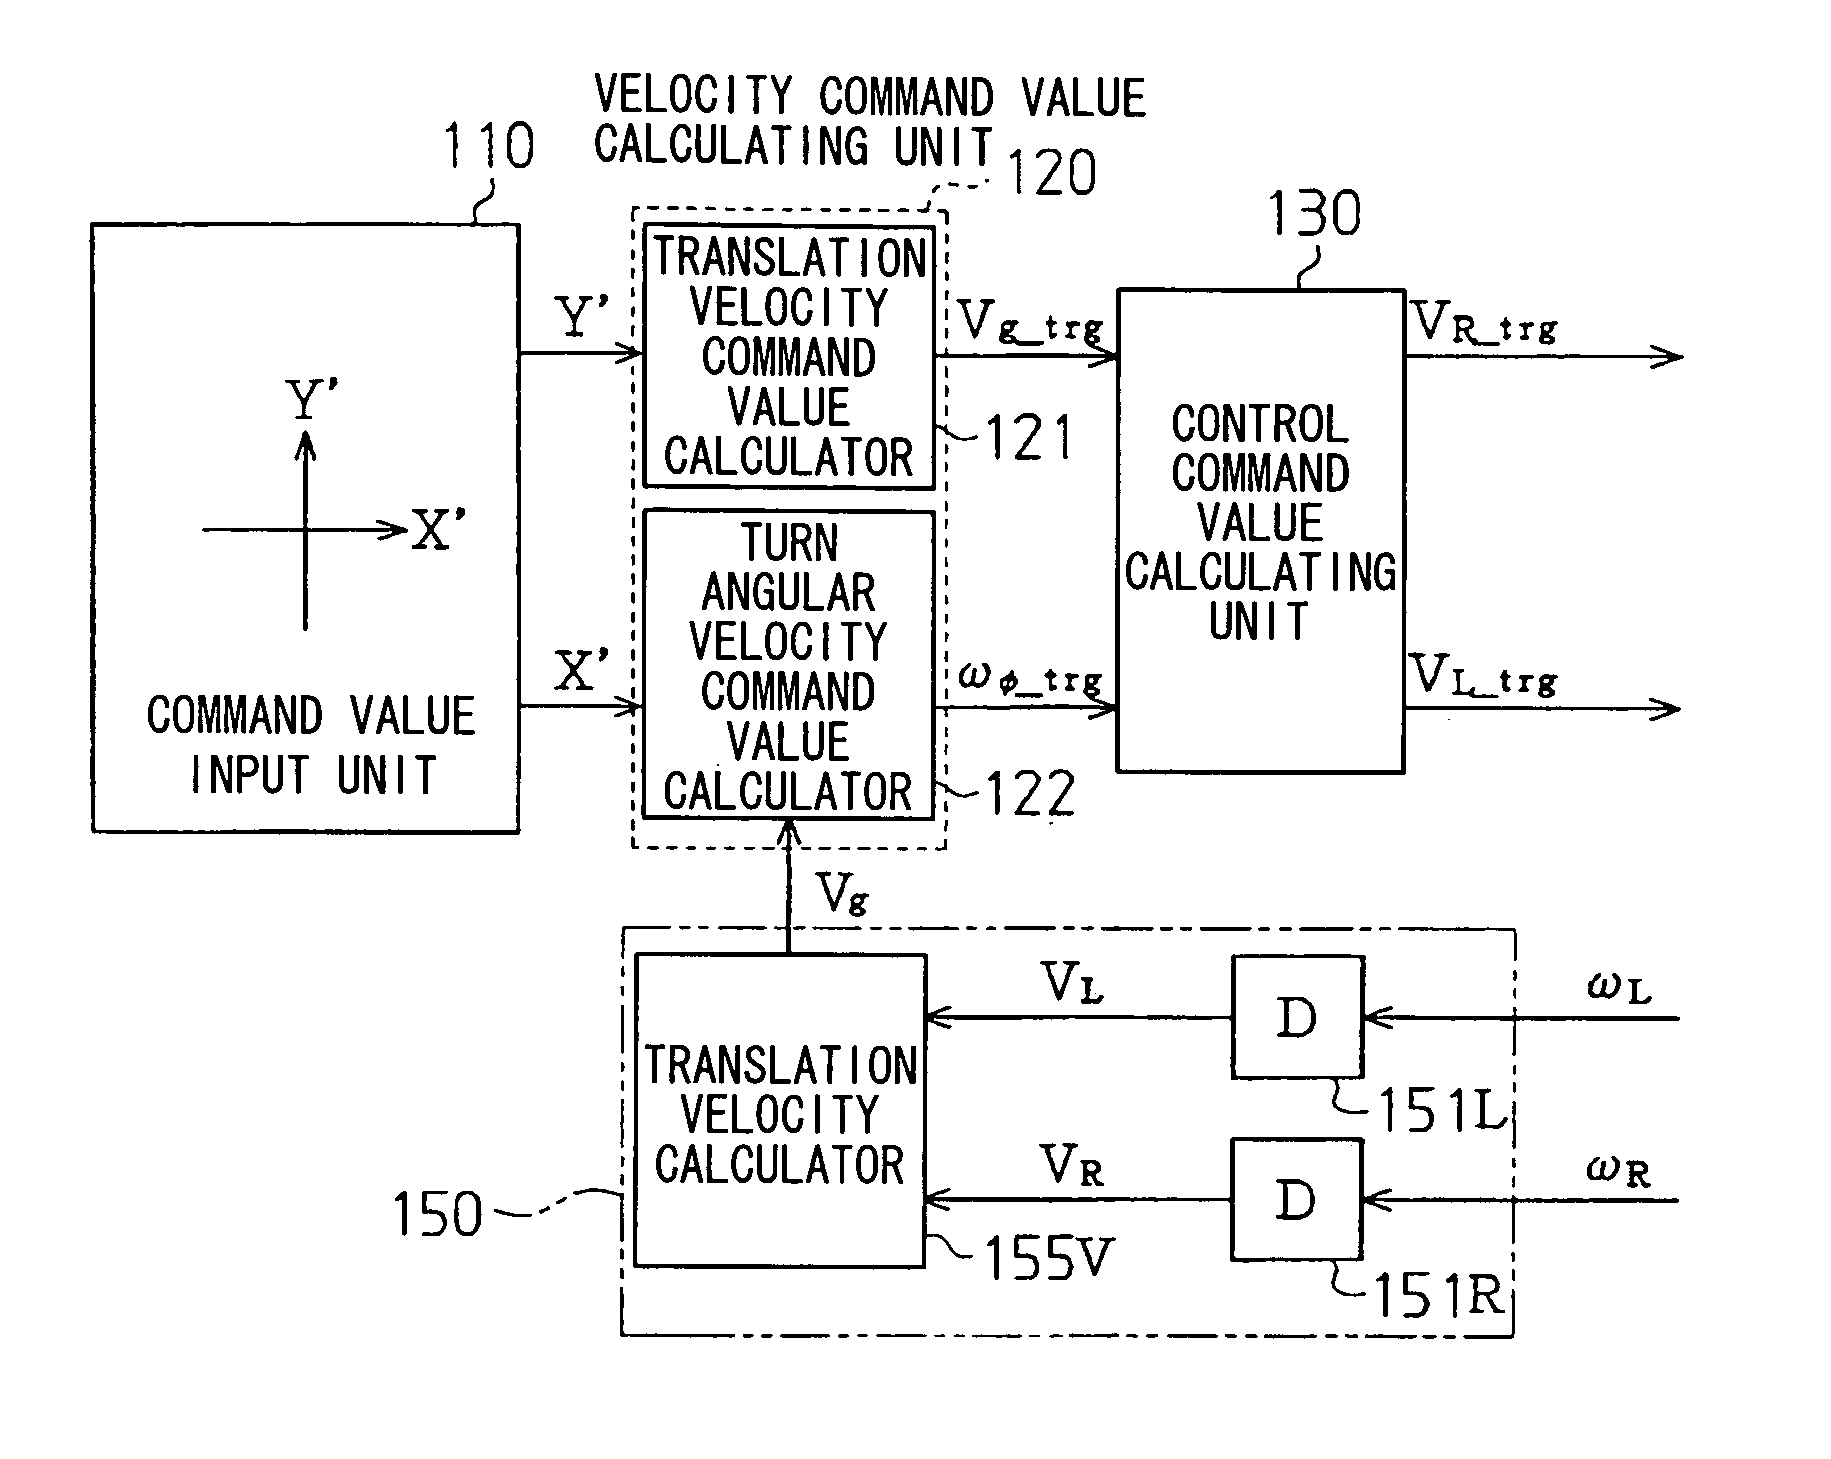 Electrically movable vehicle and control program for driving electrically movable vehicle